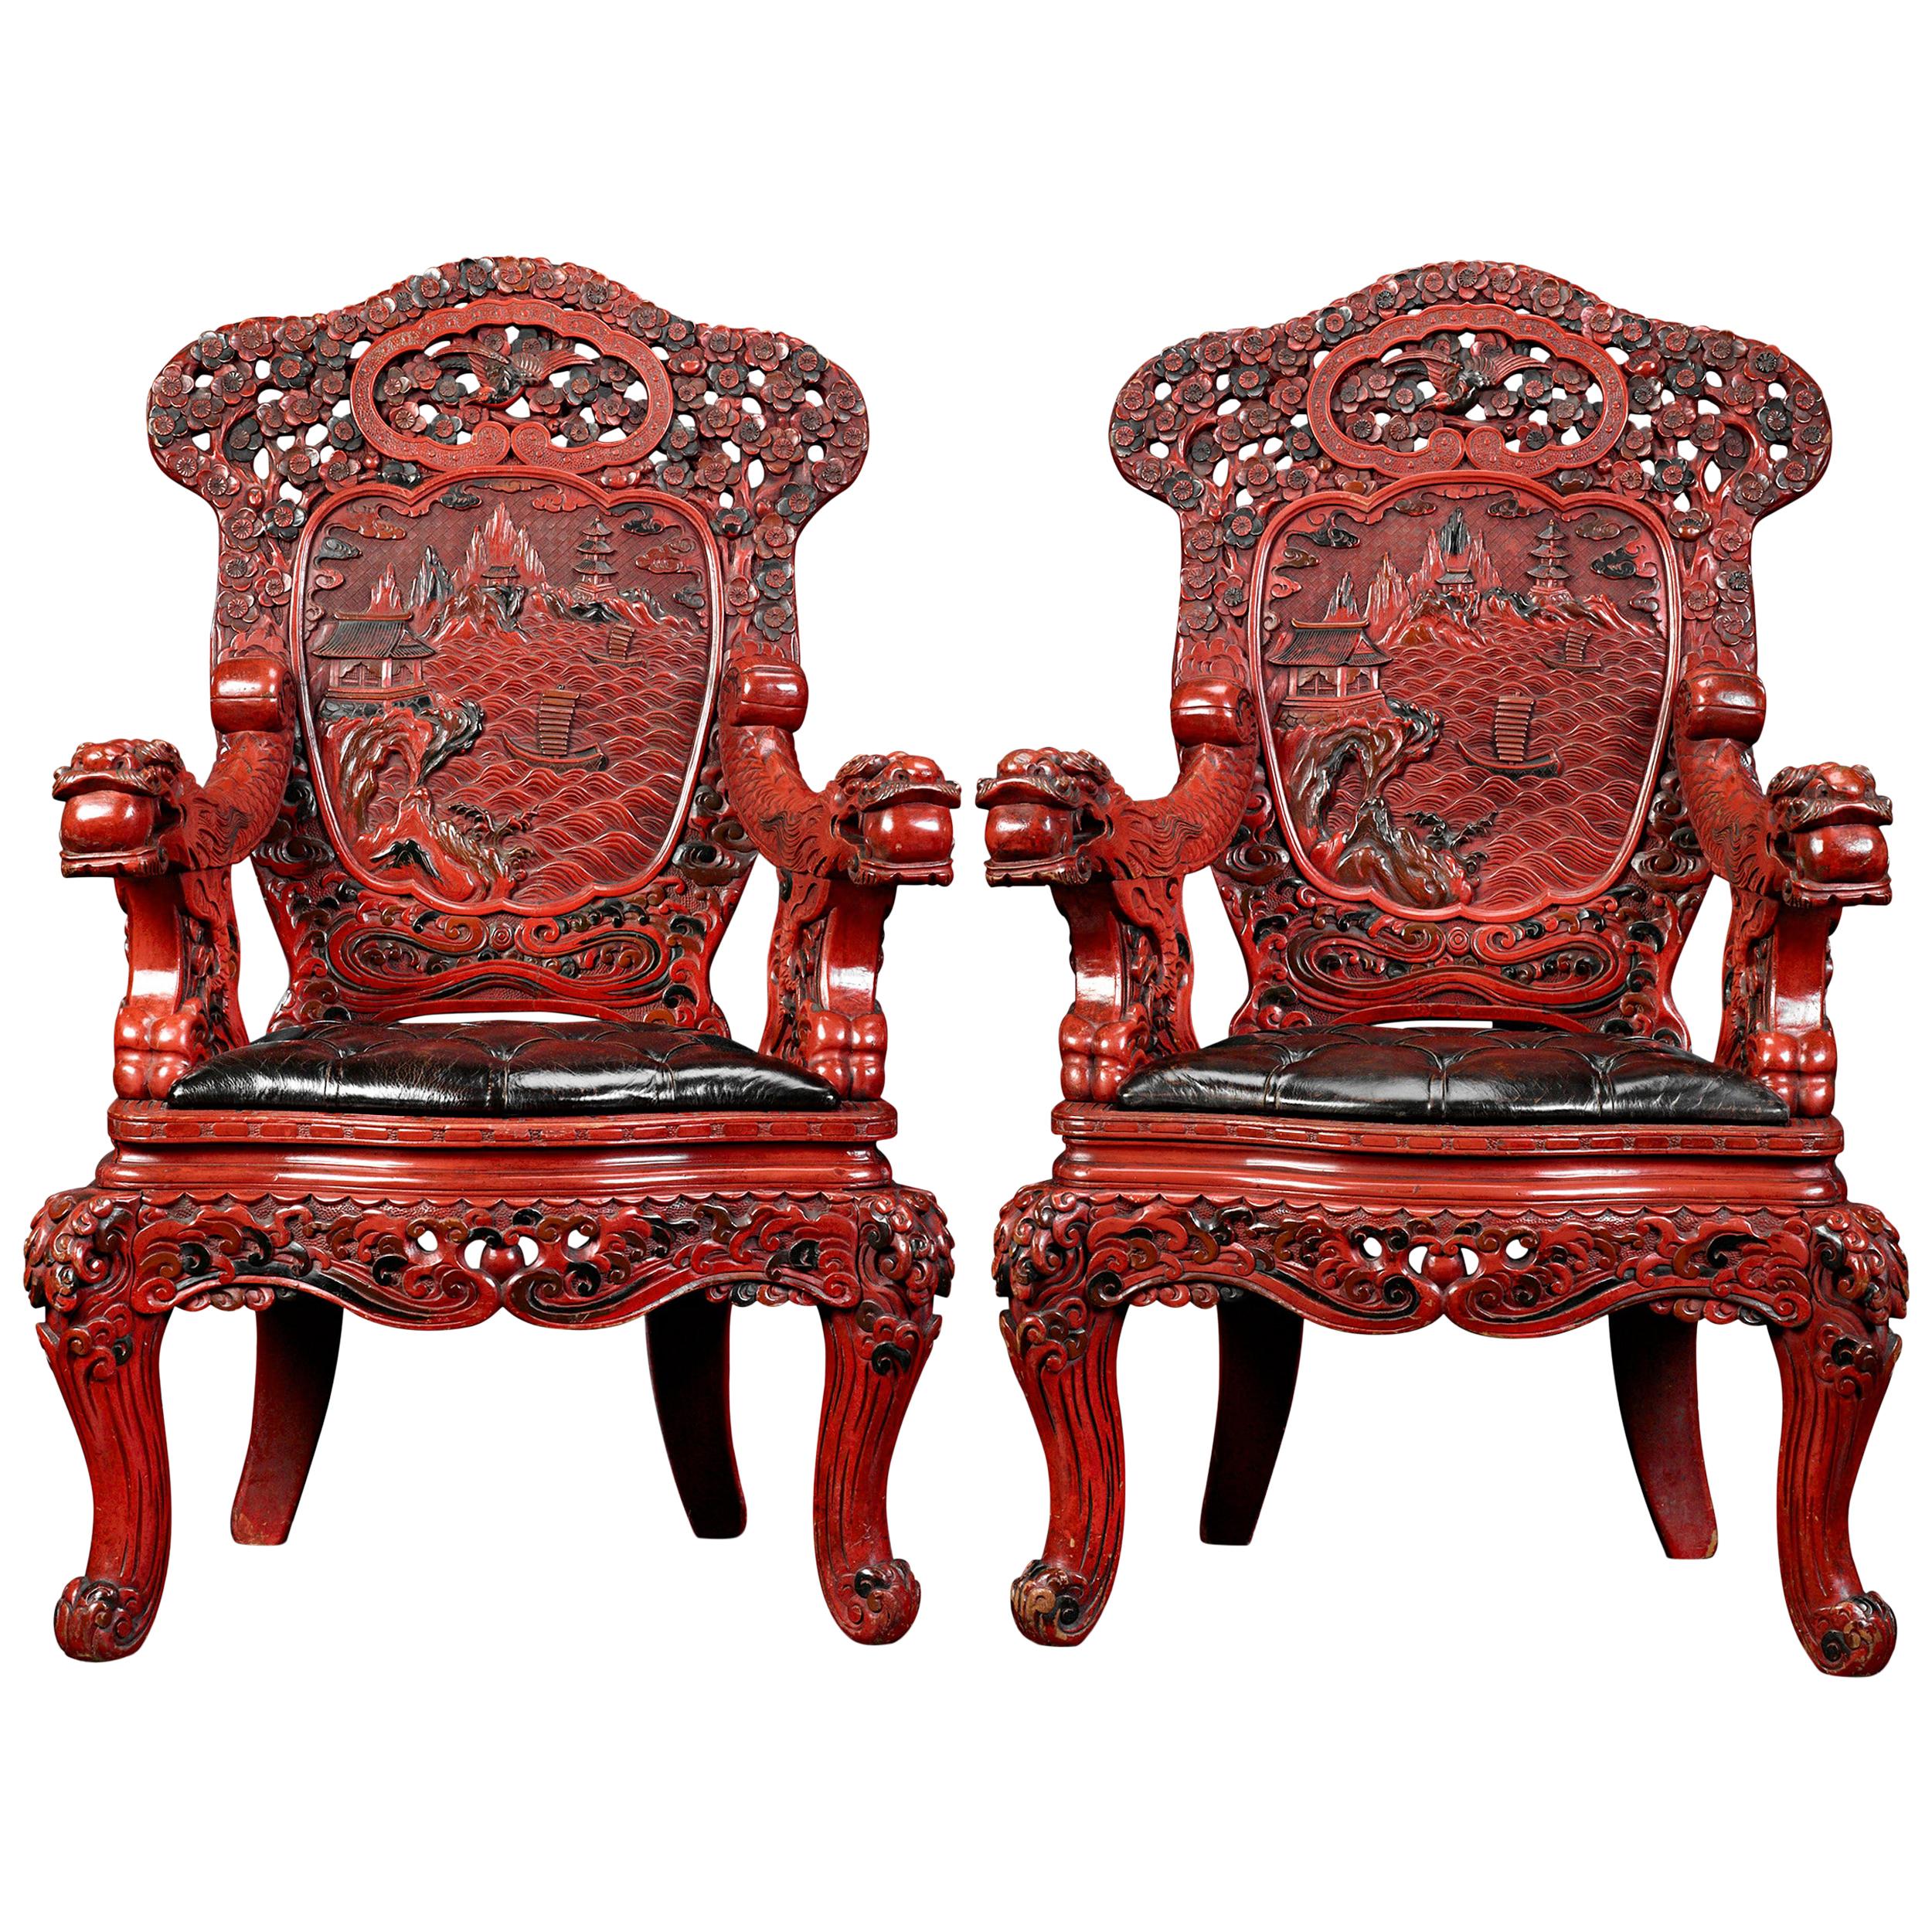 Pair of Lacquered Chinese Throne Chairs